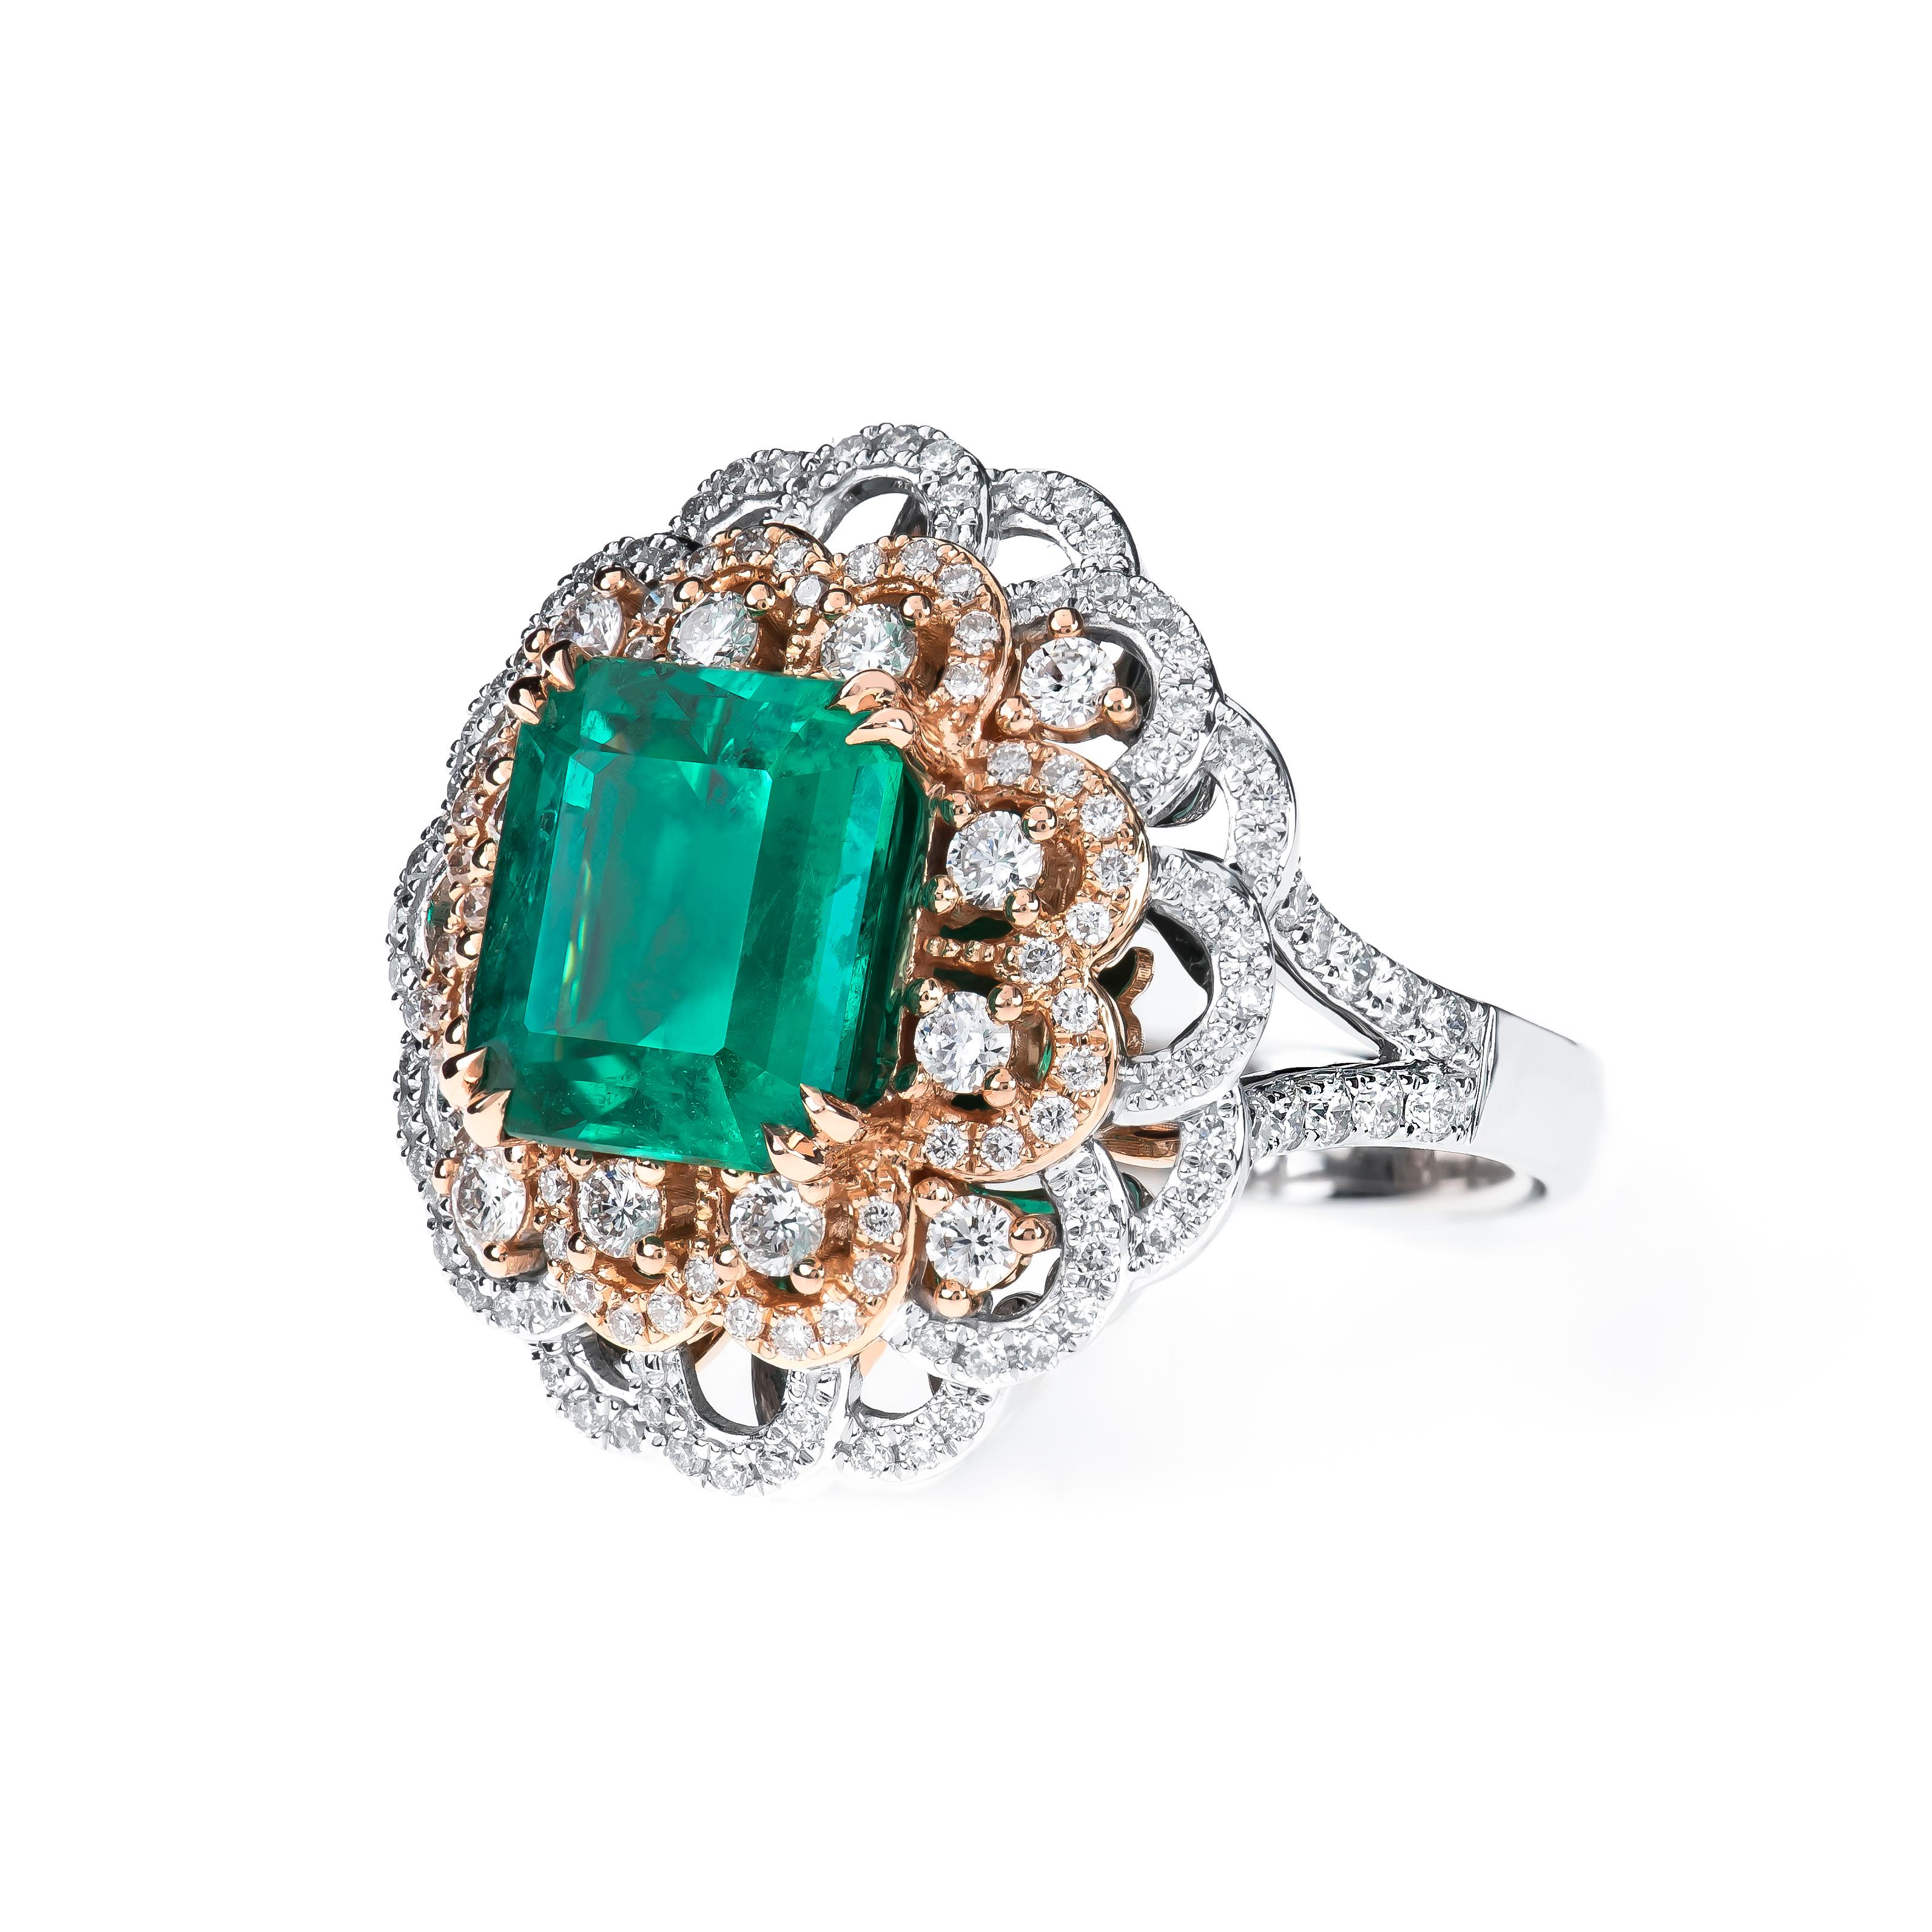 4.05ct Colombian emerald (GIA F1 minor oil) , octagonal step cut set  in an 18kt  rose and white gold cocktail ring with 1.27ctw in diamonds, diamond quality is F-G color, VS2-SI1 clarity. Ring size 7, can be sized larger or smaller upon request.